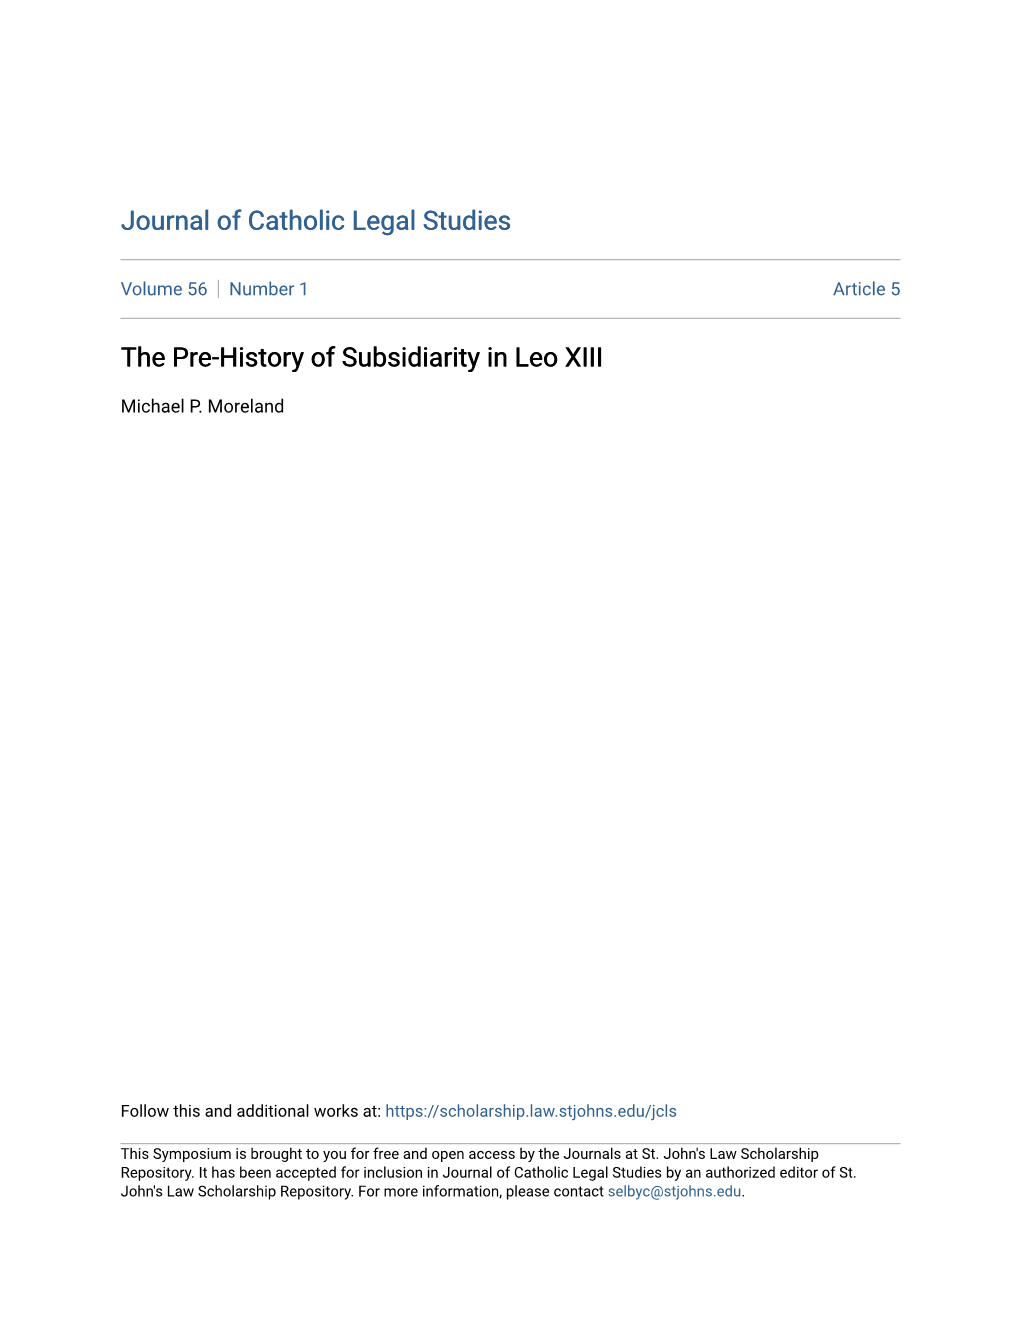 The Pre-History of Subsidiarity in Leo XIII